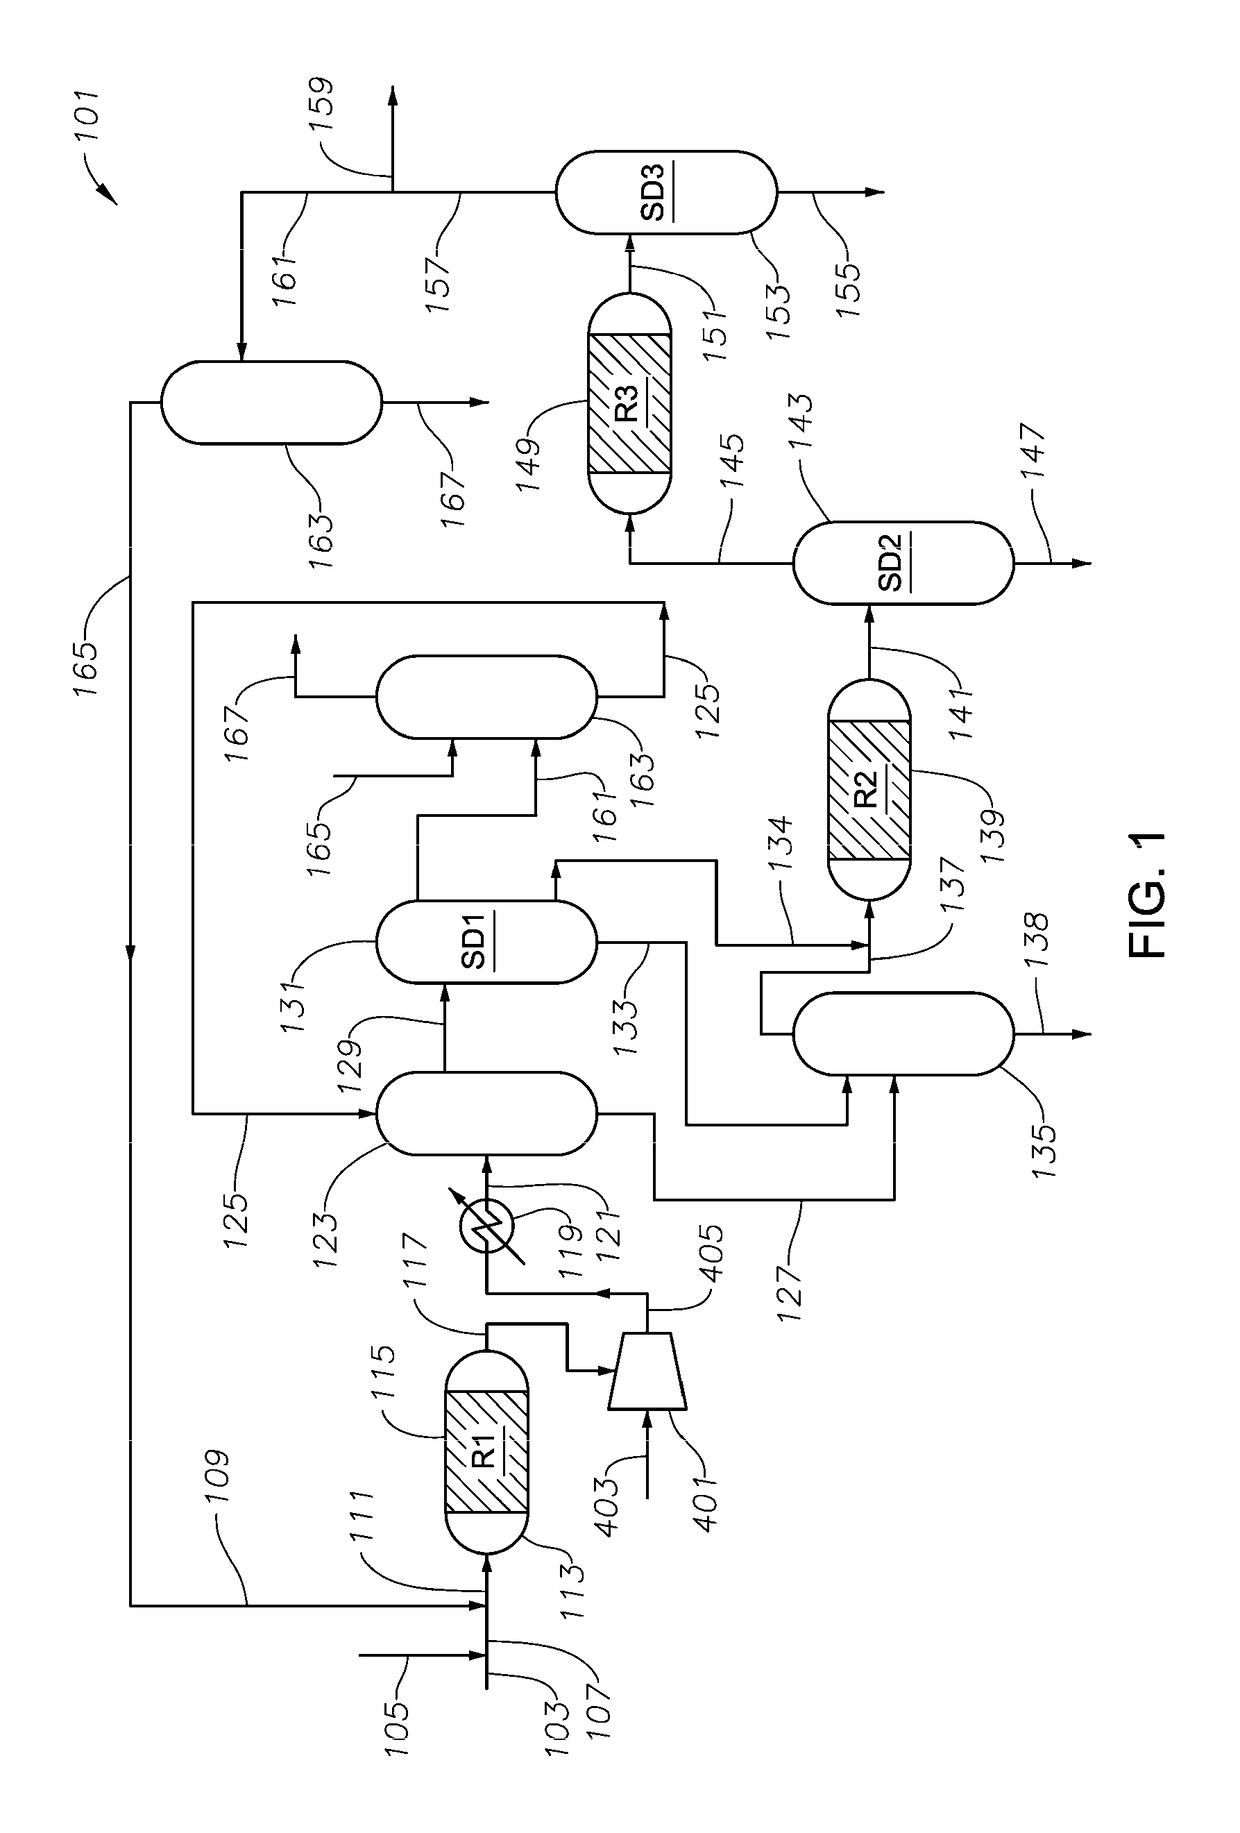 Process and system for making cyclopentadiene and/or dicyclopentadiene